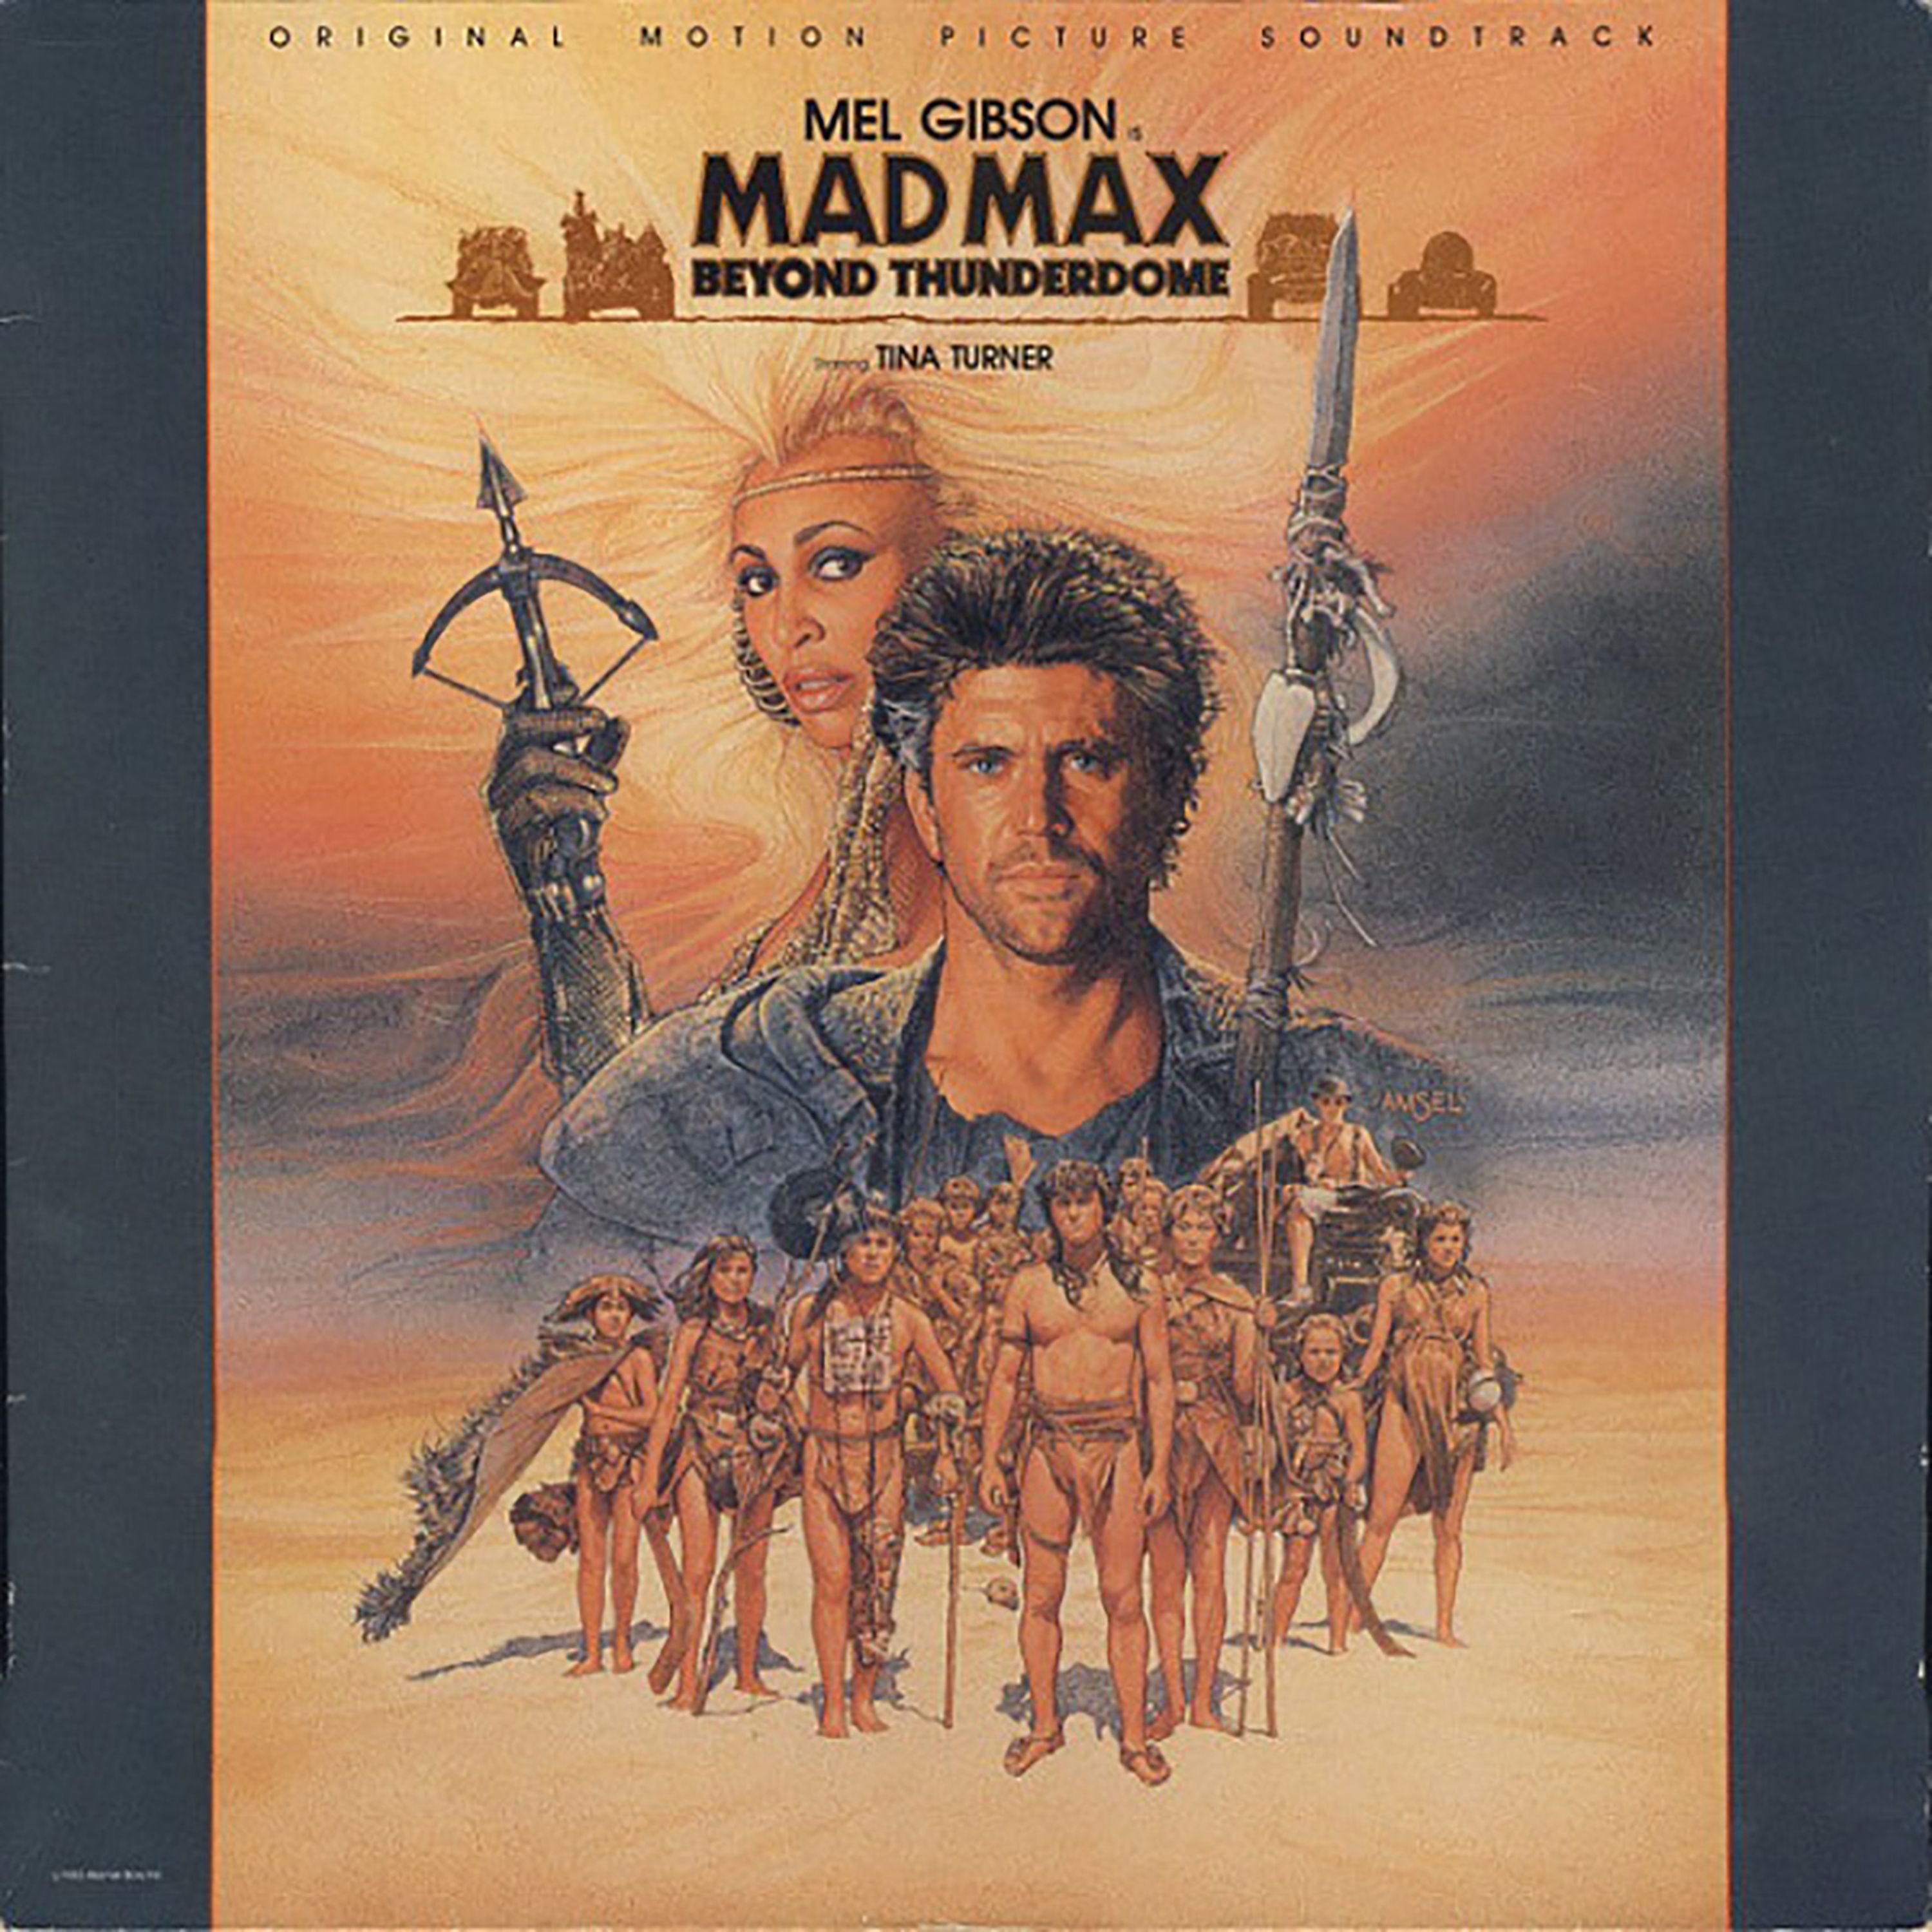 mad max beyond thunderdome soundtrack